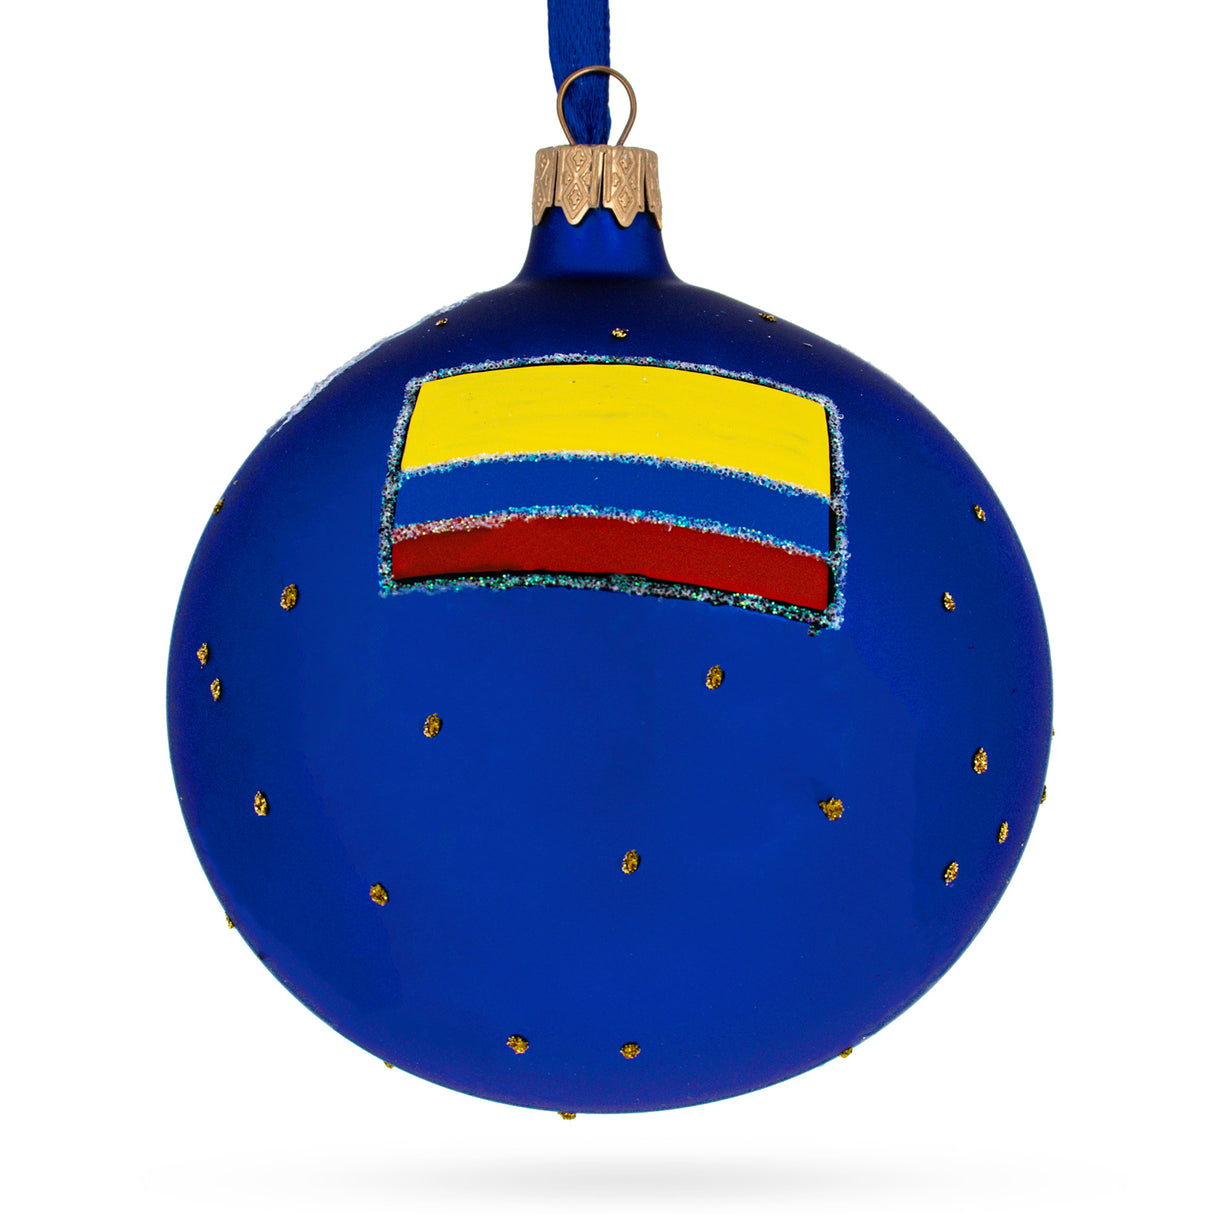 Buy Christmas Ornaments Travel South America Colombia by BestPysanky Online Gift Ship